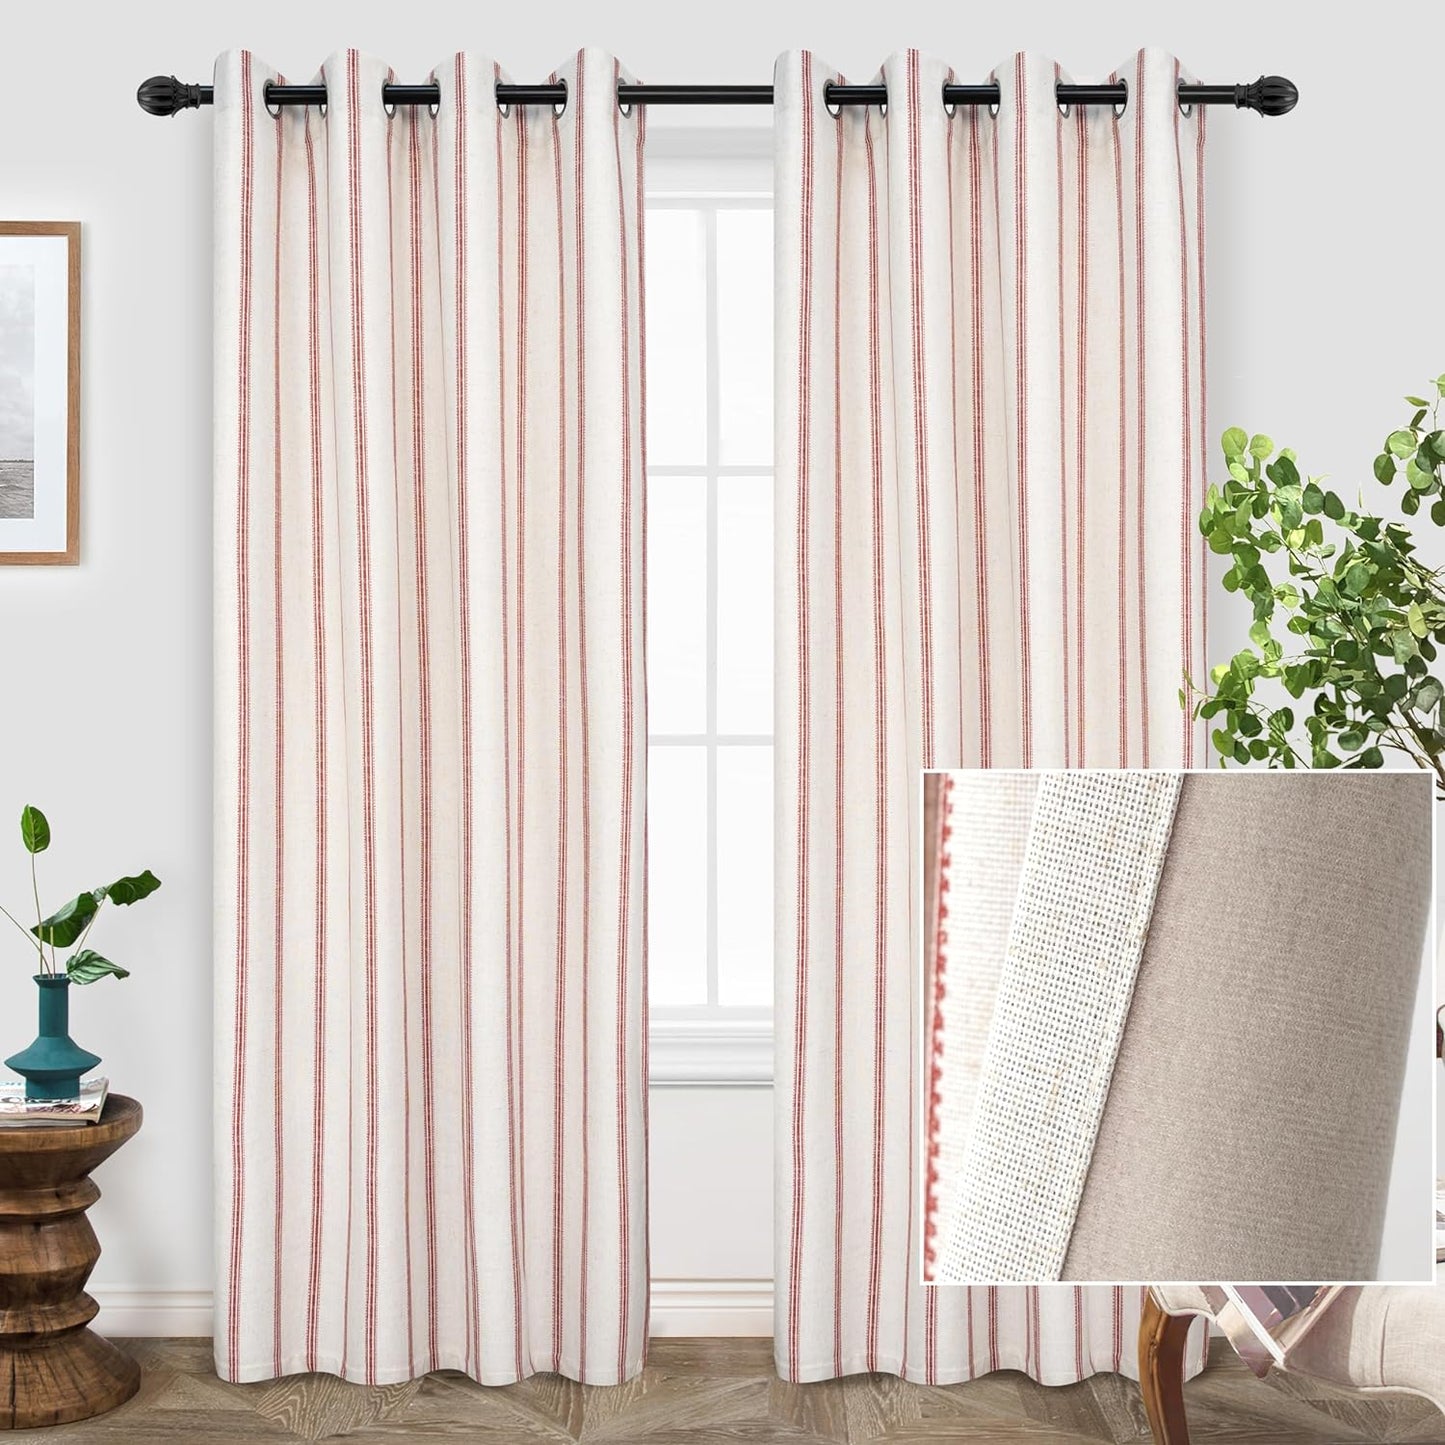 Driftaway Farmhouse Linen Blend Blackout Curtains 84 Inches Long for Bedroom Vertical Striped Printed Linen Curtains Thermal Insulated Grommet Lined Treatments for Living Room 2 Panels W52 X L84 Grey  DriftAway Thermal Red 52"X84" 